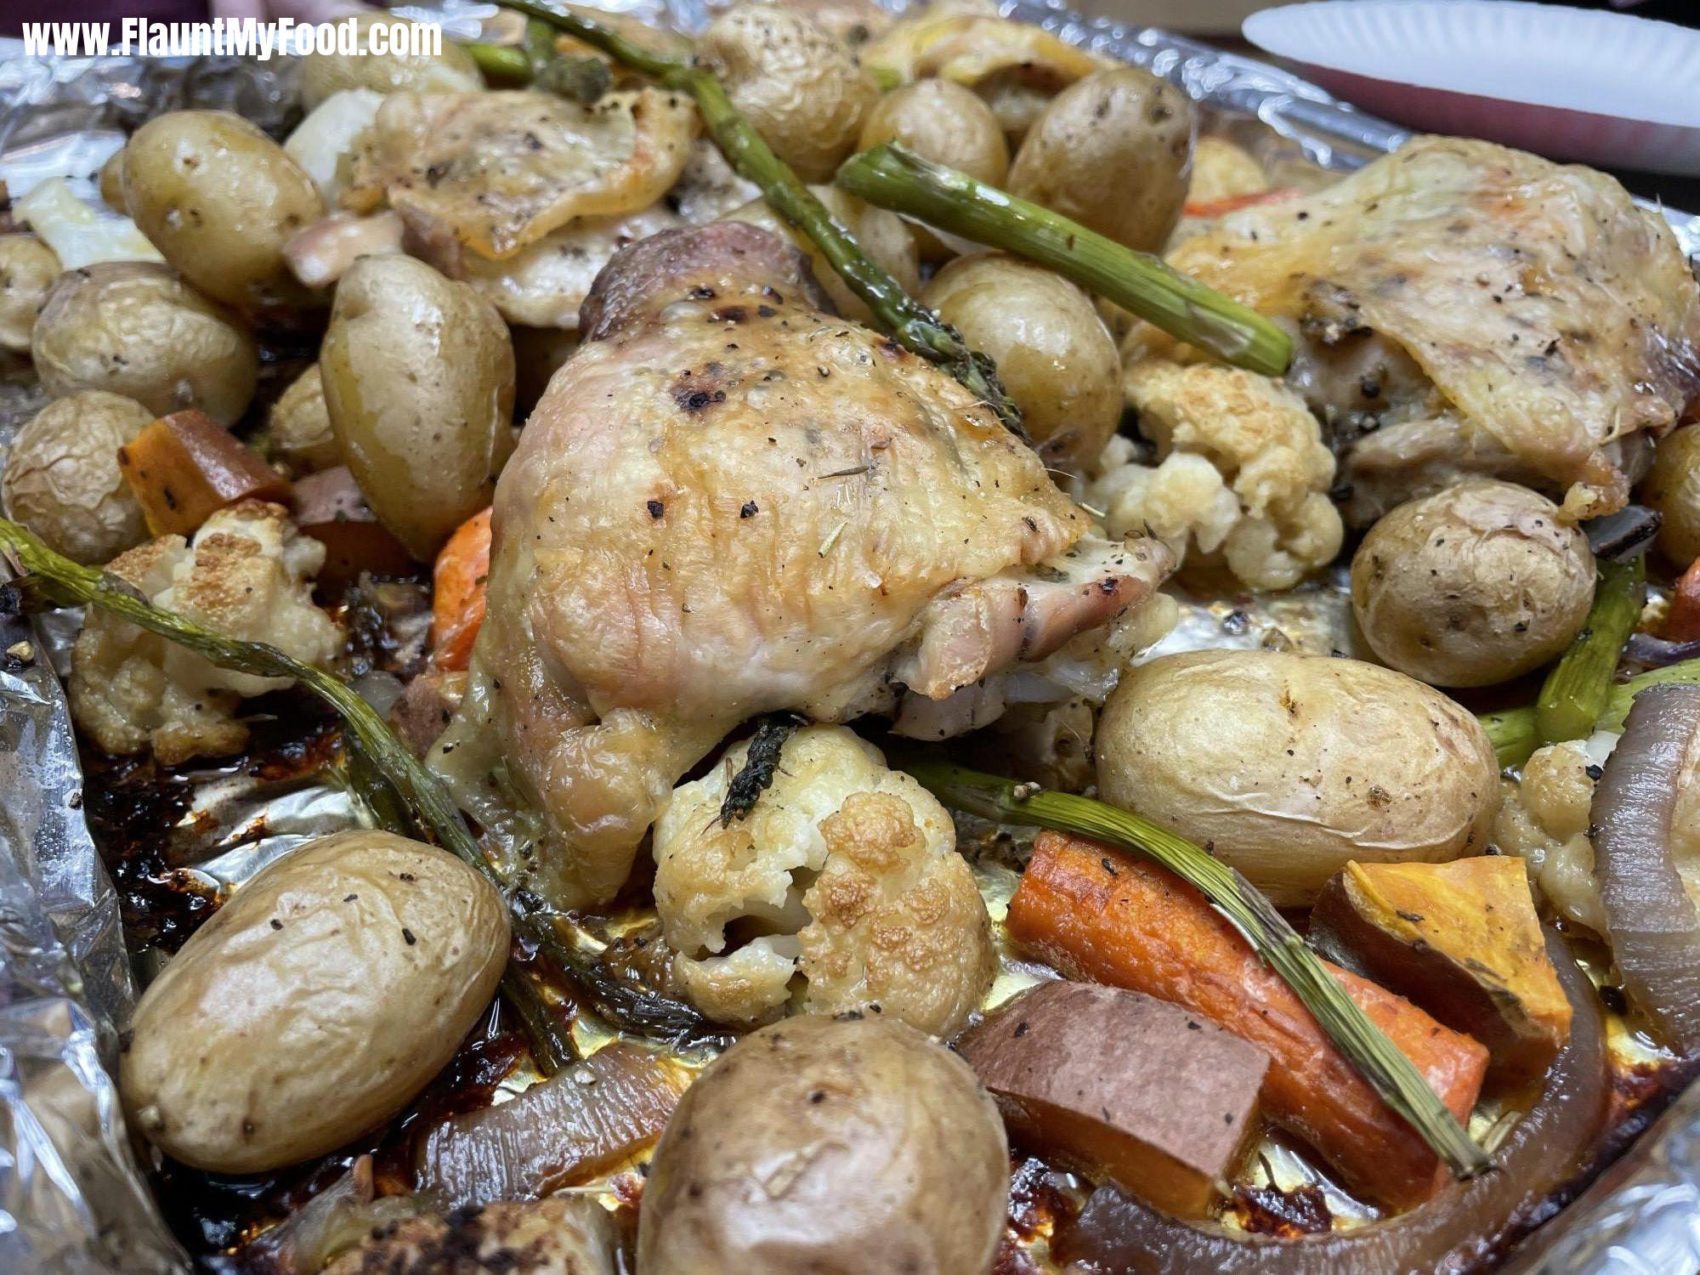 Cooked chicken with vegetables!Cooked chicken with vegetables! We build this very often, we just throw a bunch of vegetables onto a pan with olive oil and then we bake at 500 degrees for about 45 minutes. So good!